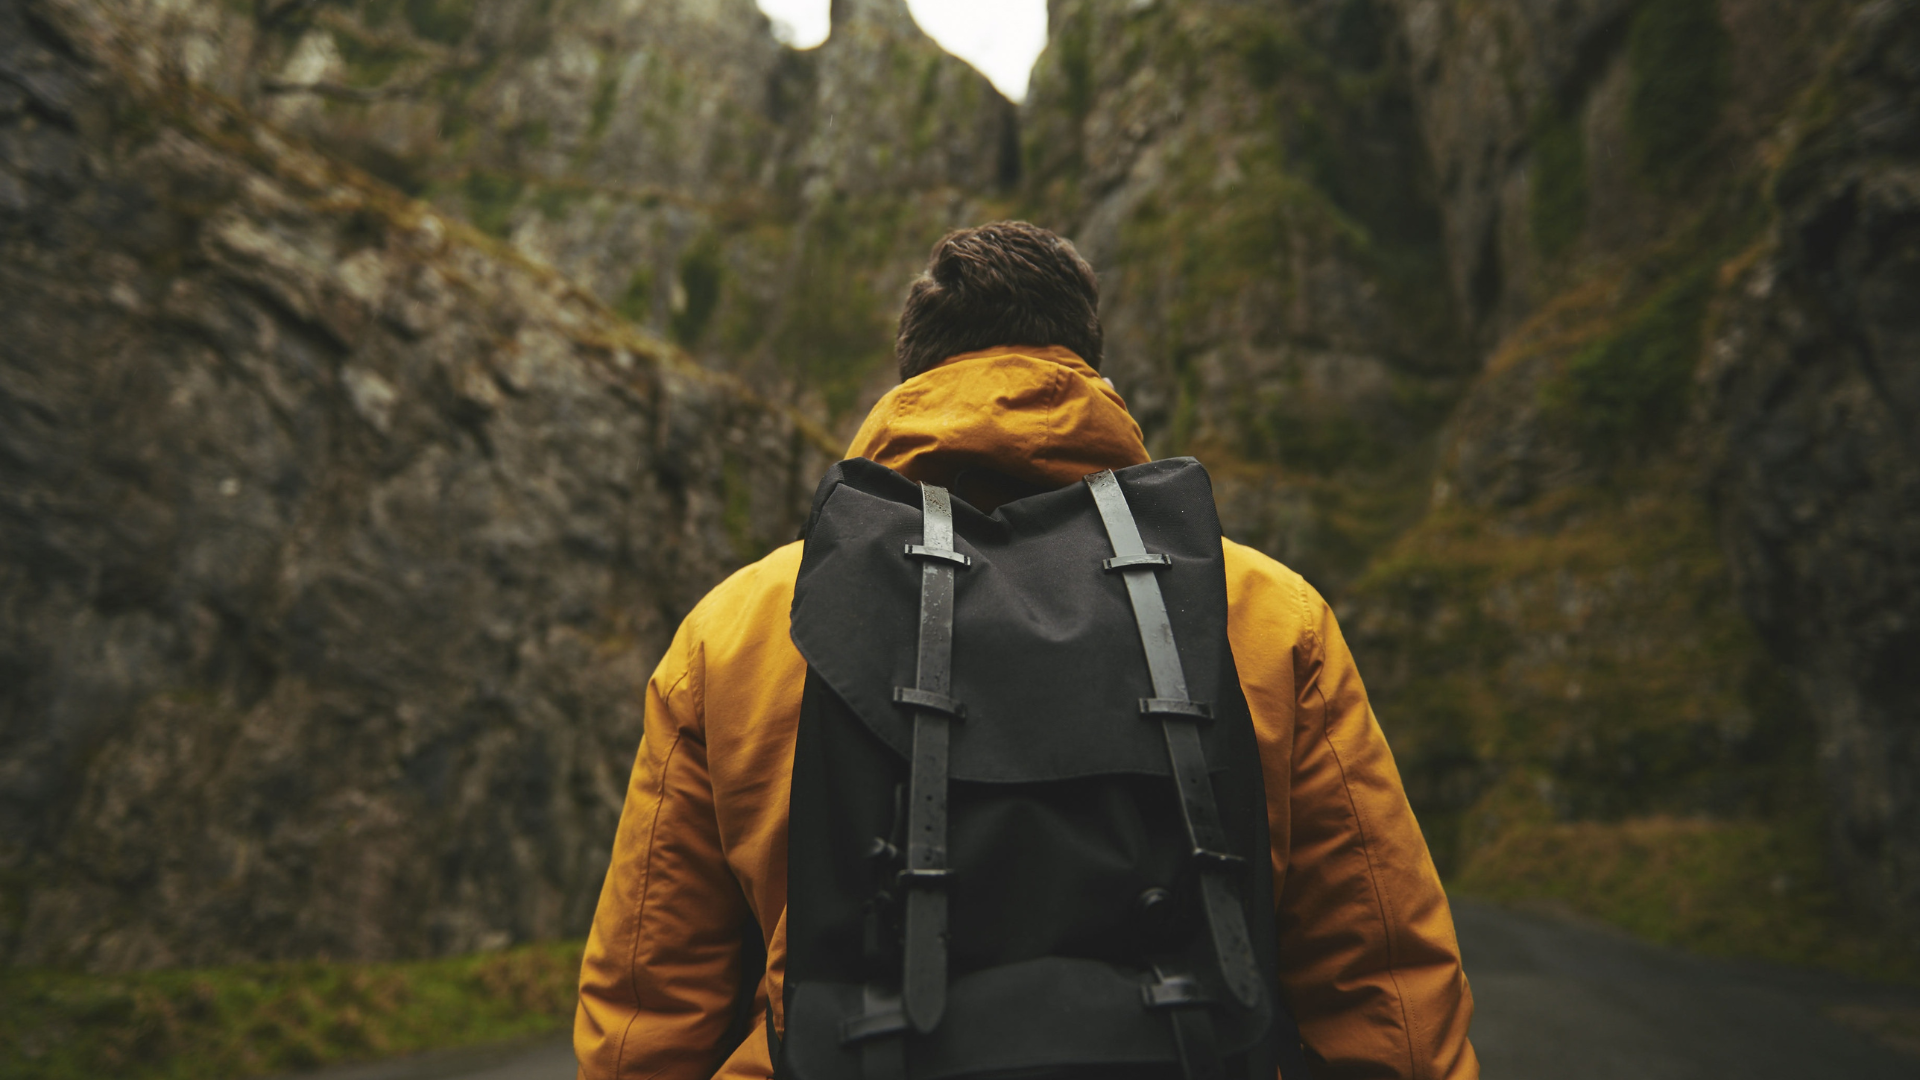 Minimalist Survival Gear for Backpacking Trips